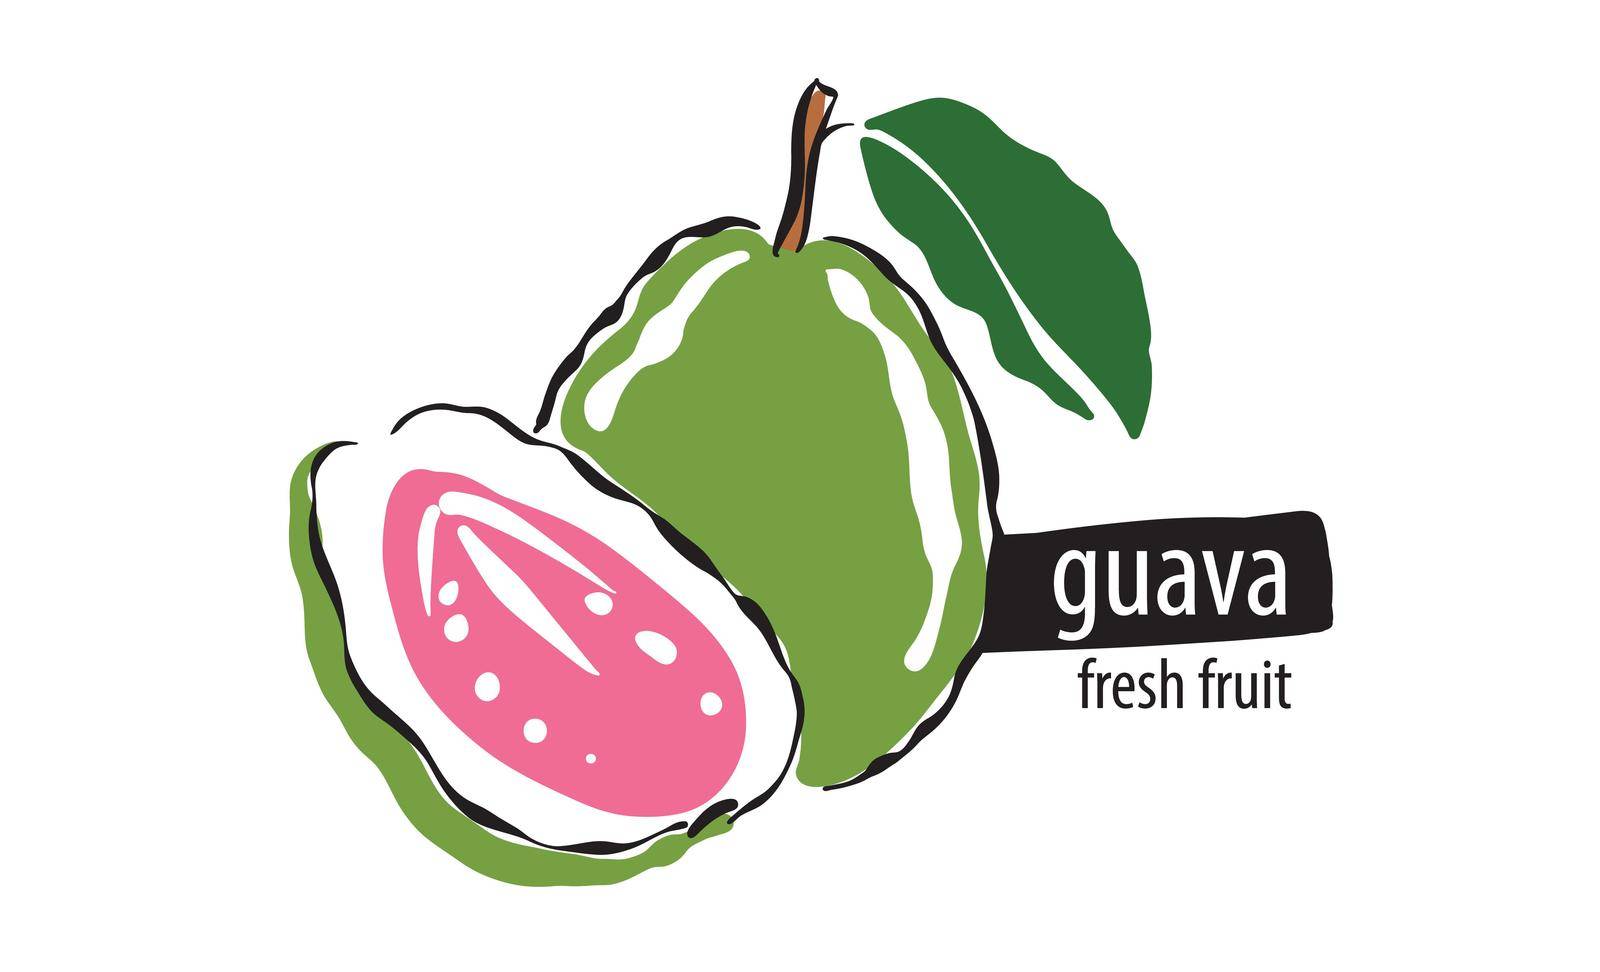 Drawn vector guava on a white background by butenkow